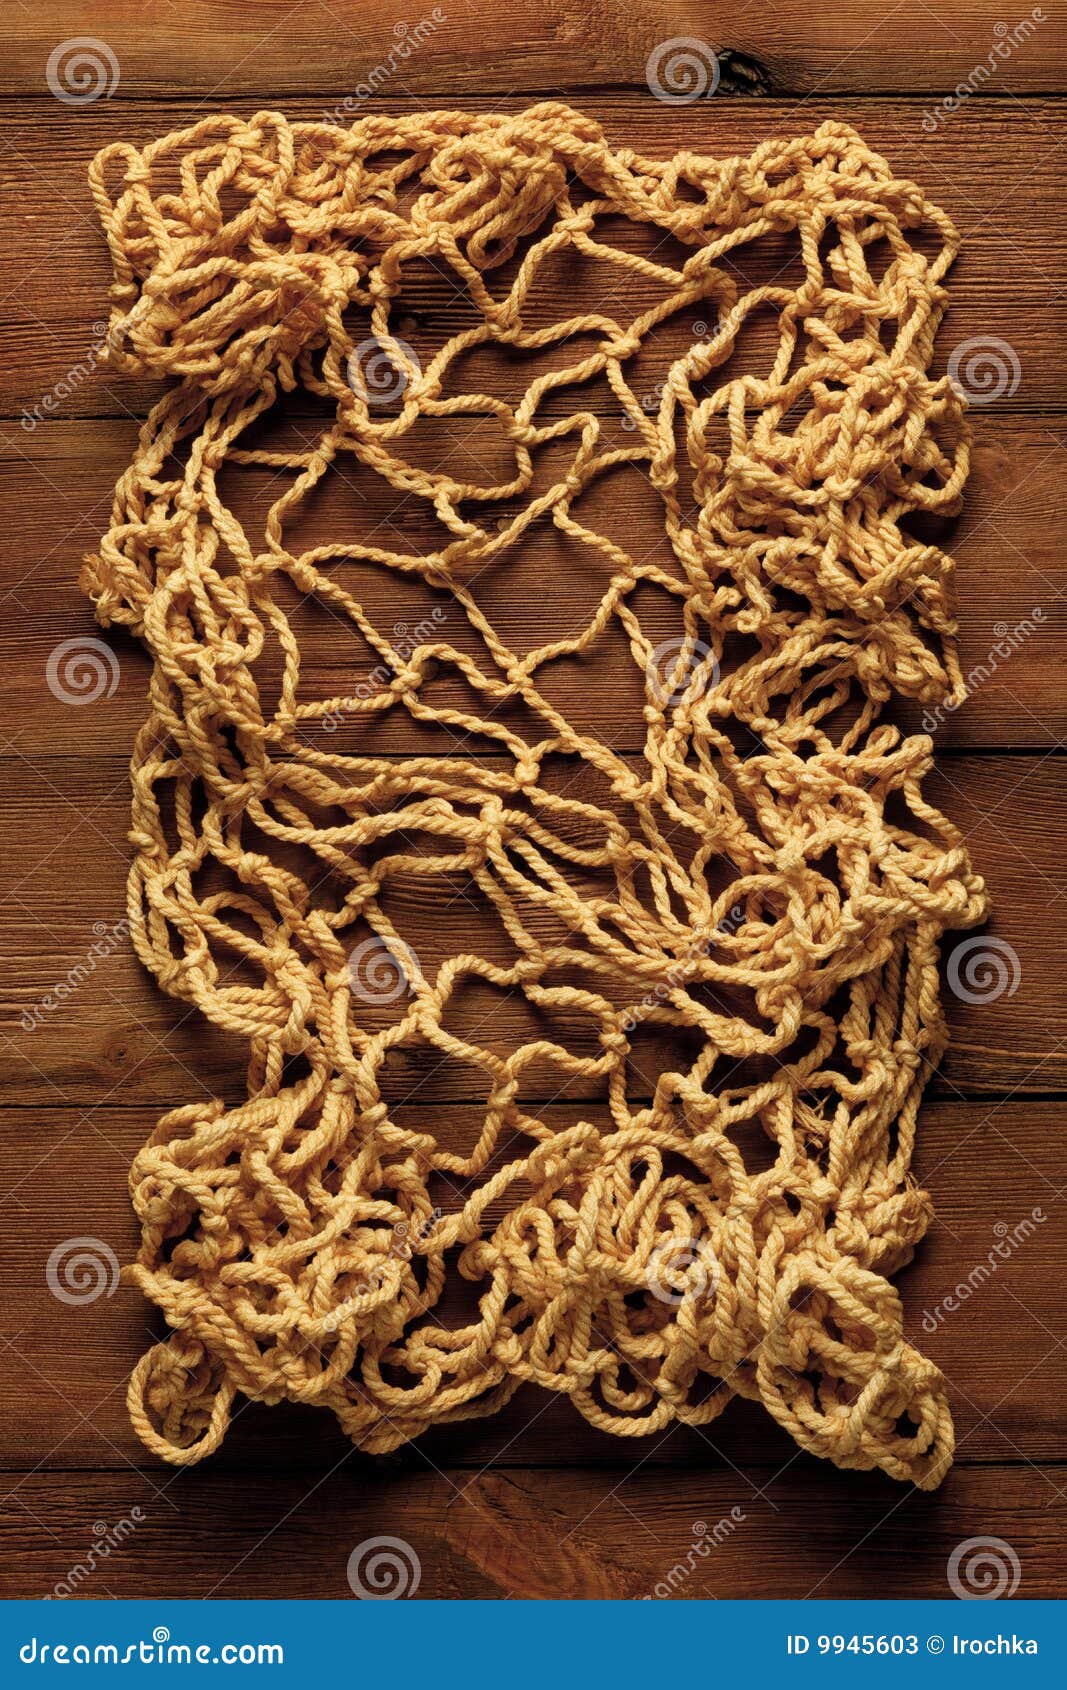 Fishing Net On Old Wood Board Stock Image - Image of close ...